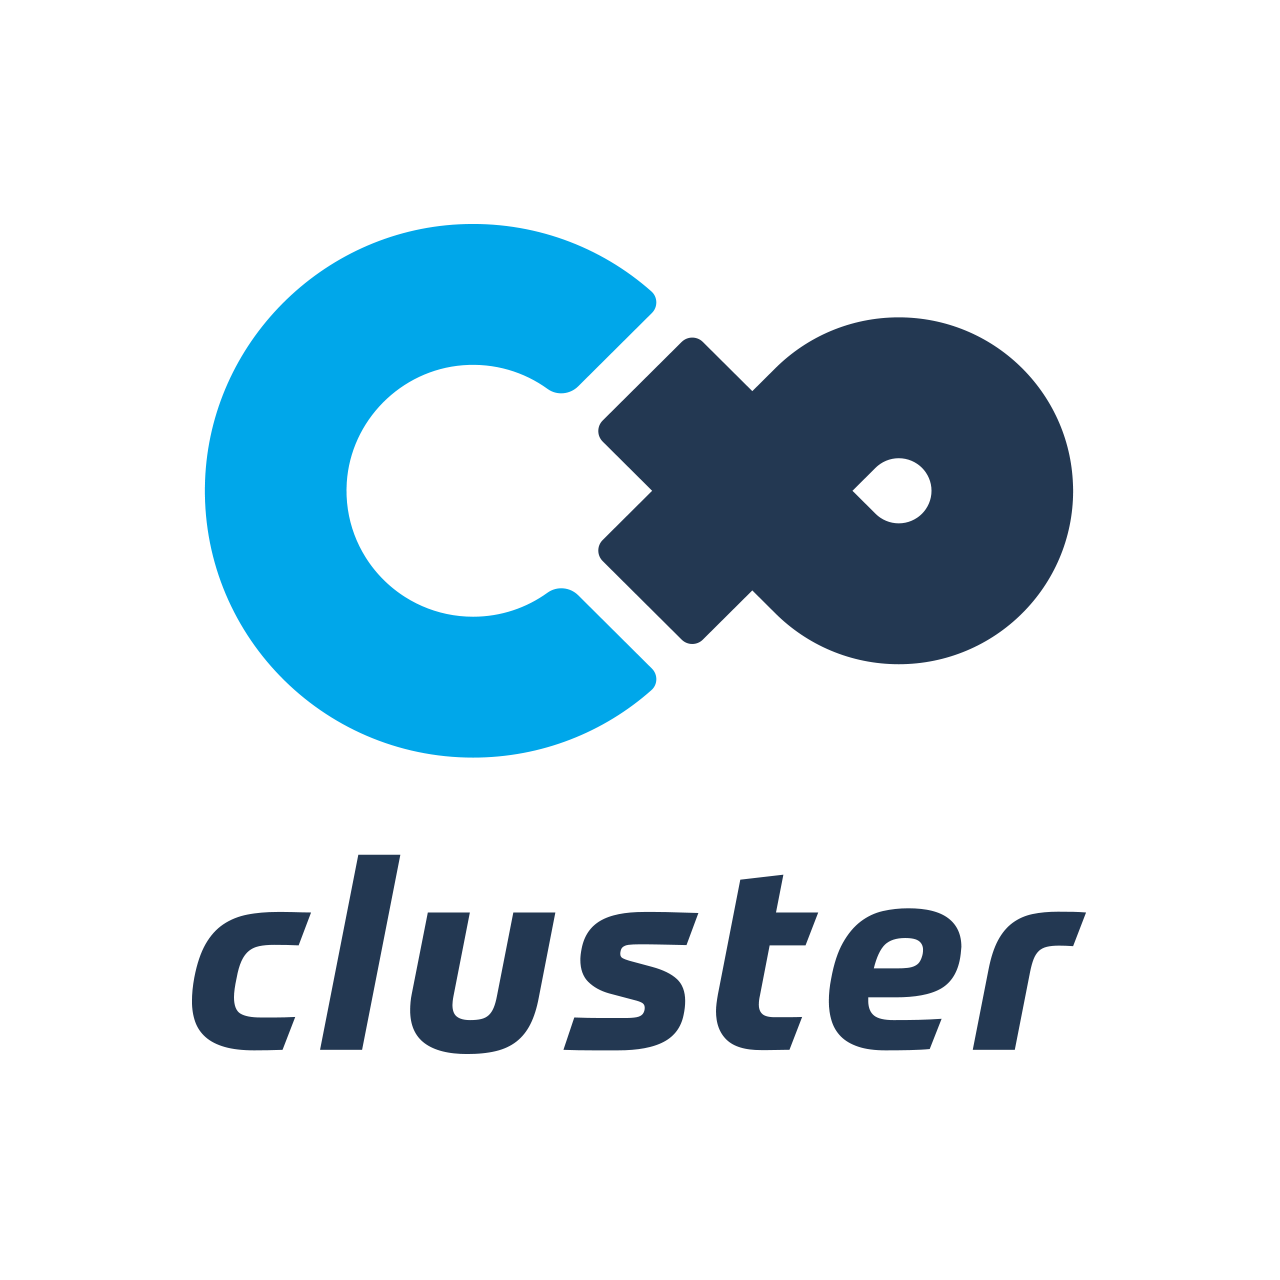 clusterロゴ